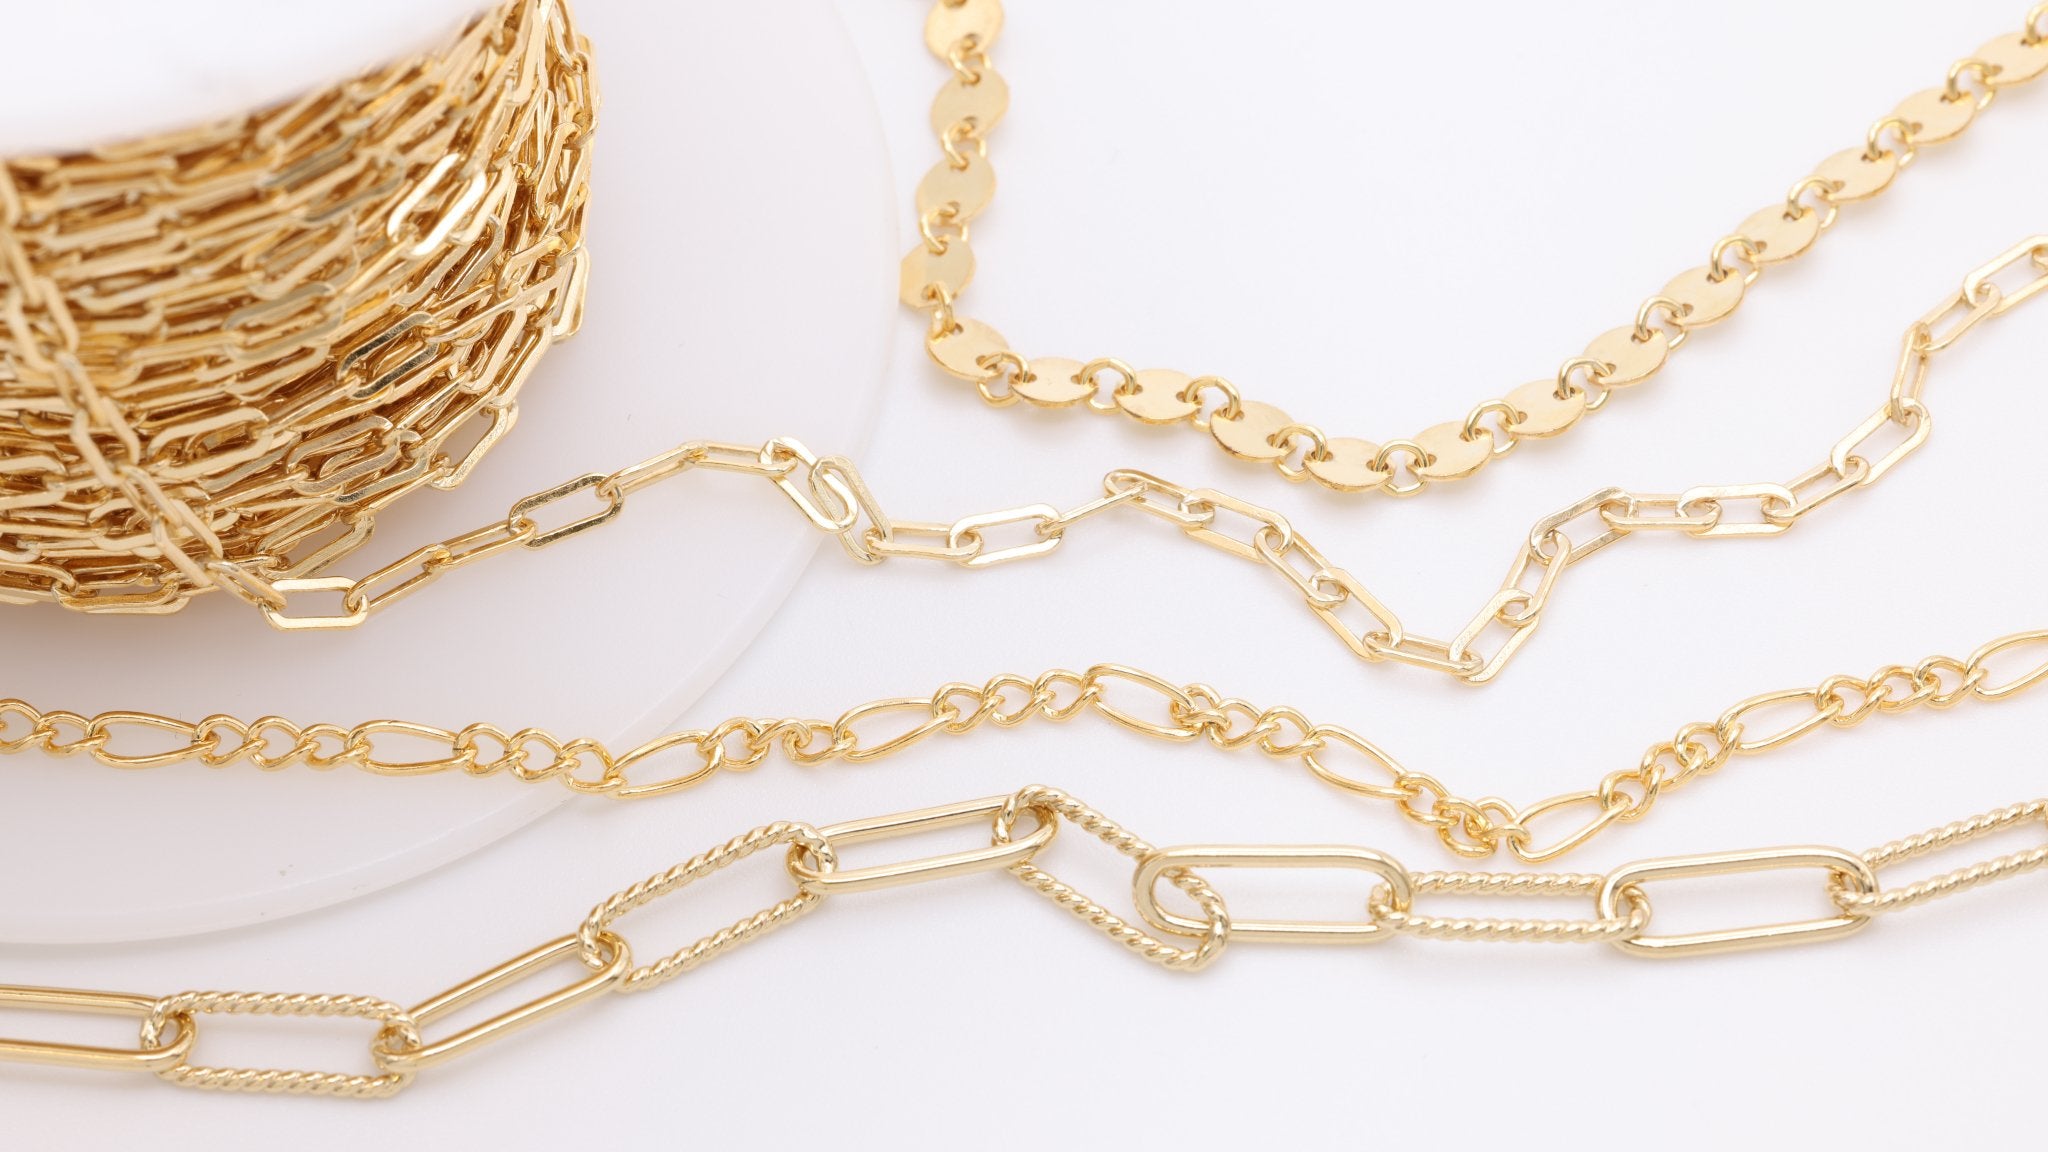 Wholesale Jewelry Chain | Cut to Length & Finished Chain | HarperCrown